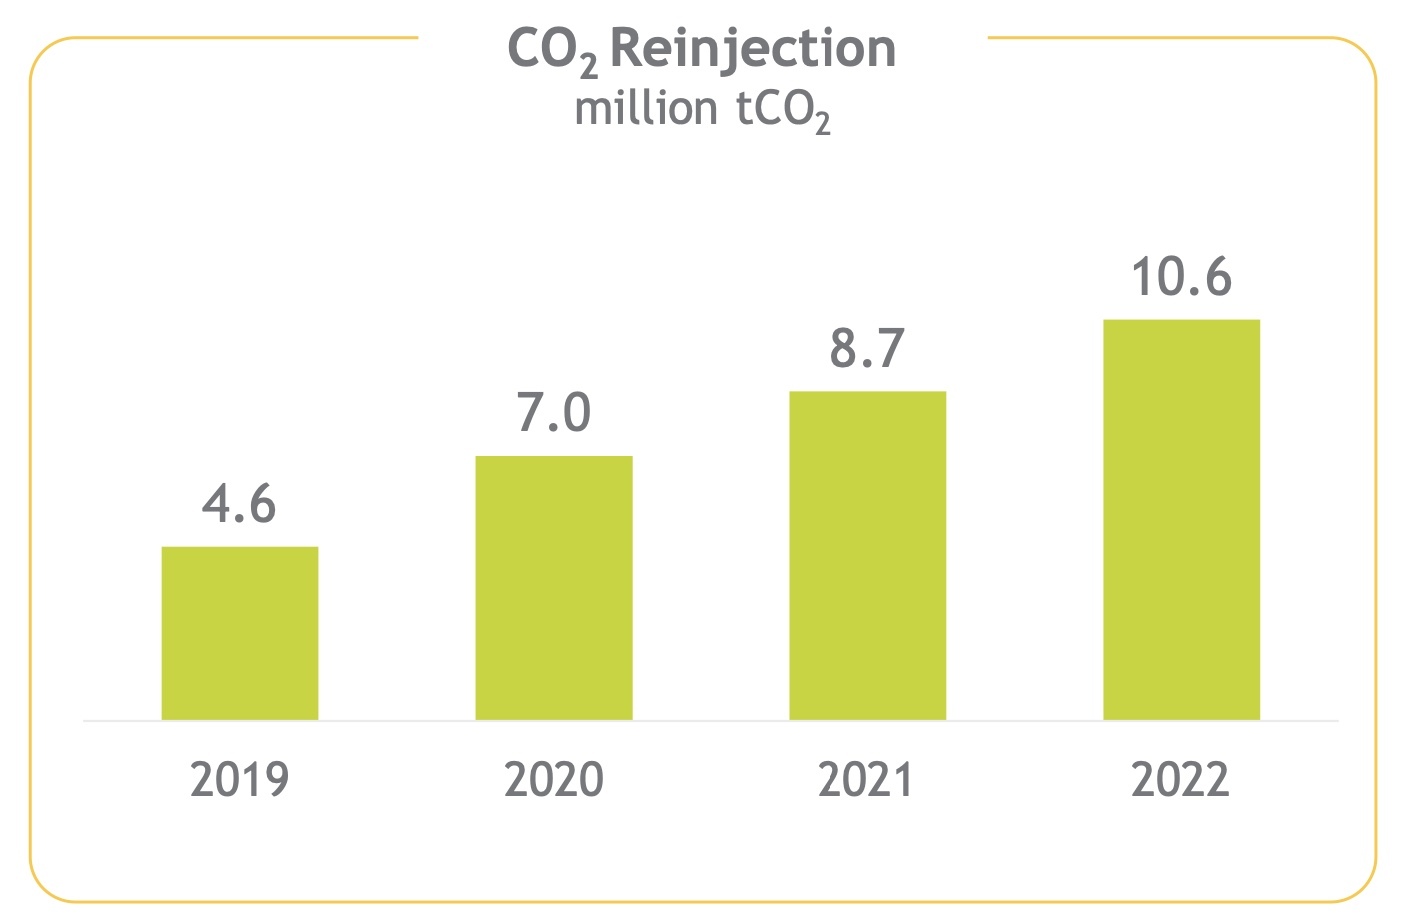 CO2 Reinjection